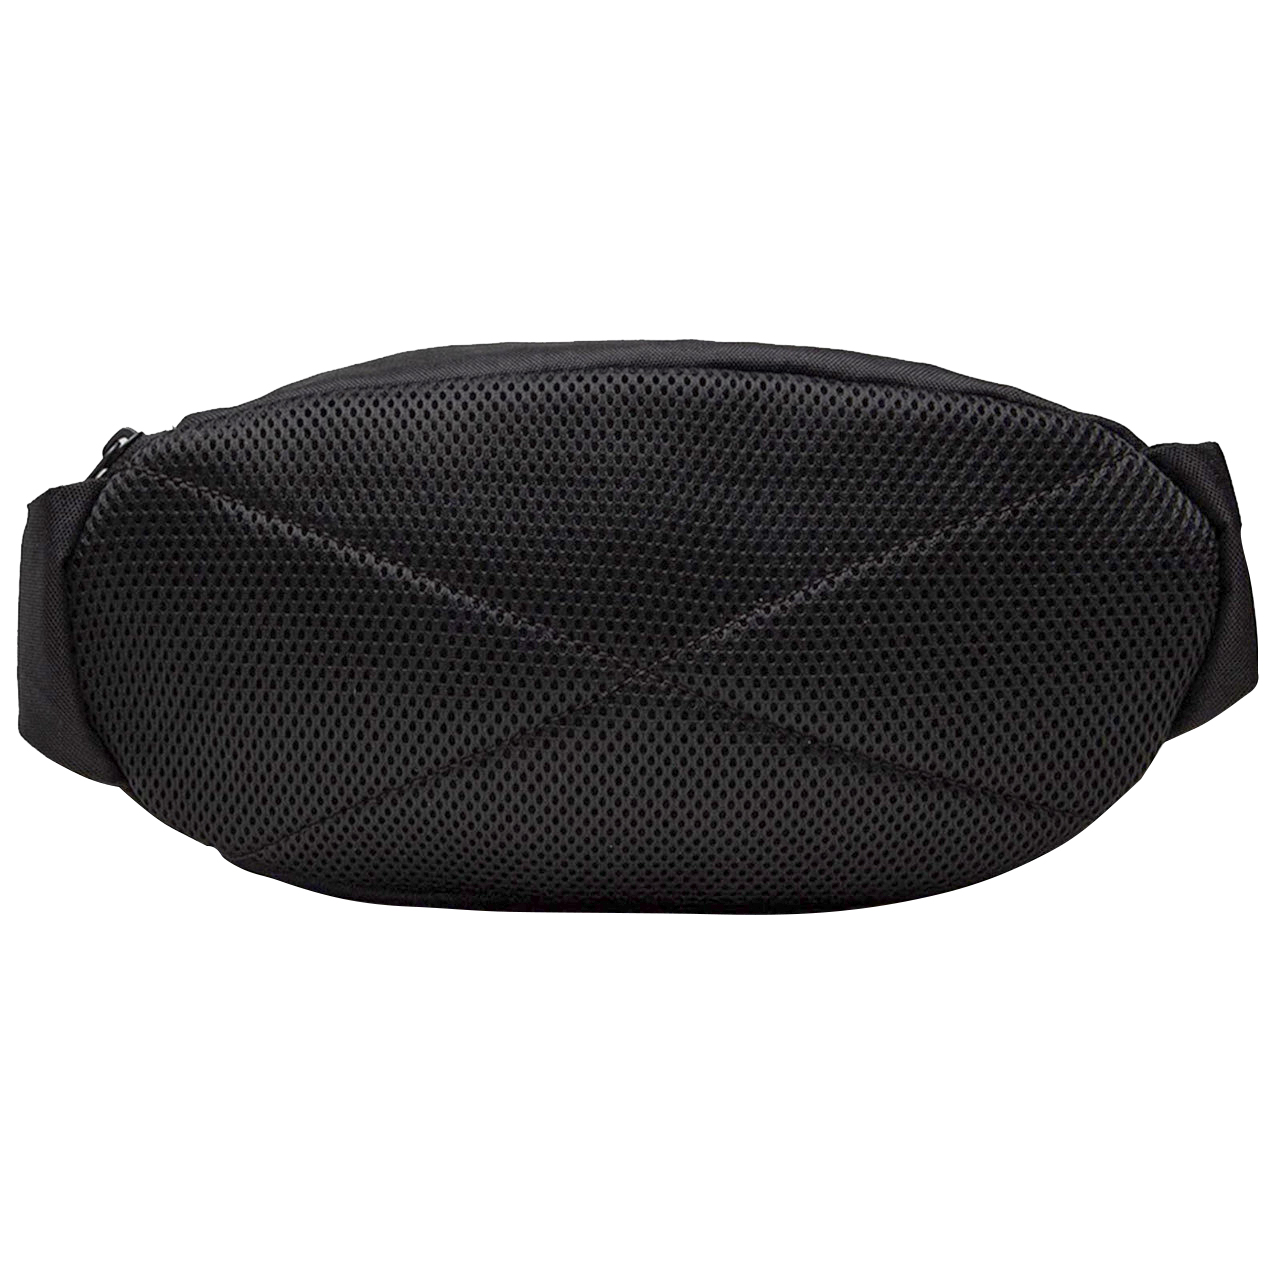 Under Armour Flex Fanny Pack | Recon Company